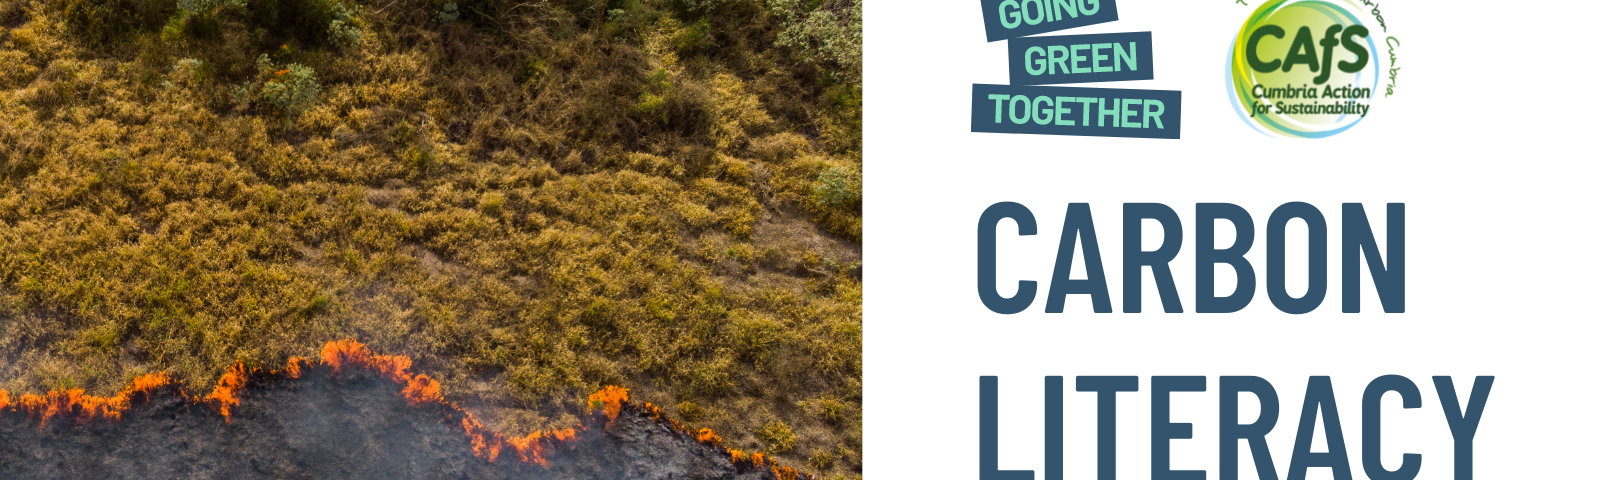 Image shows burning grassland, and title: Carbon Literacy Training